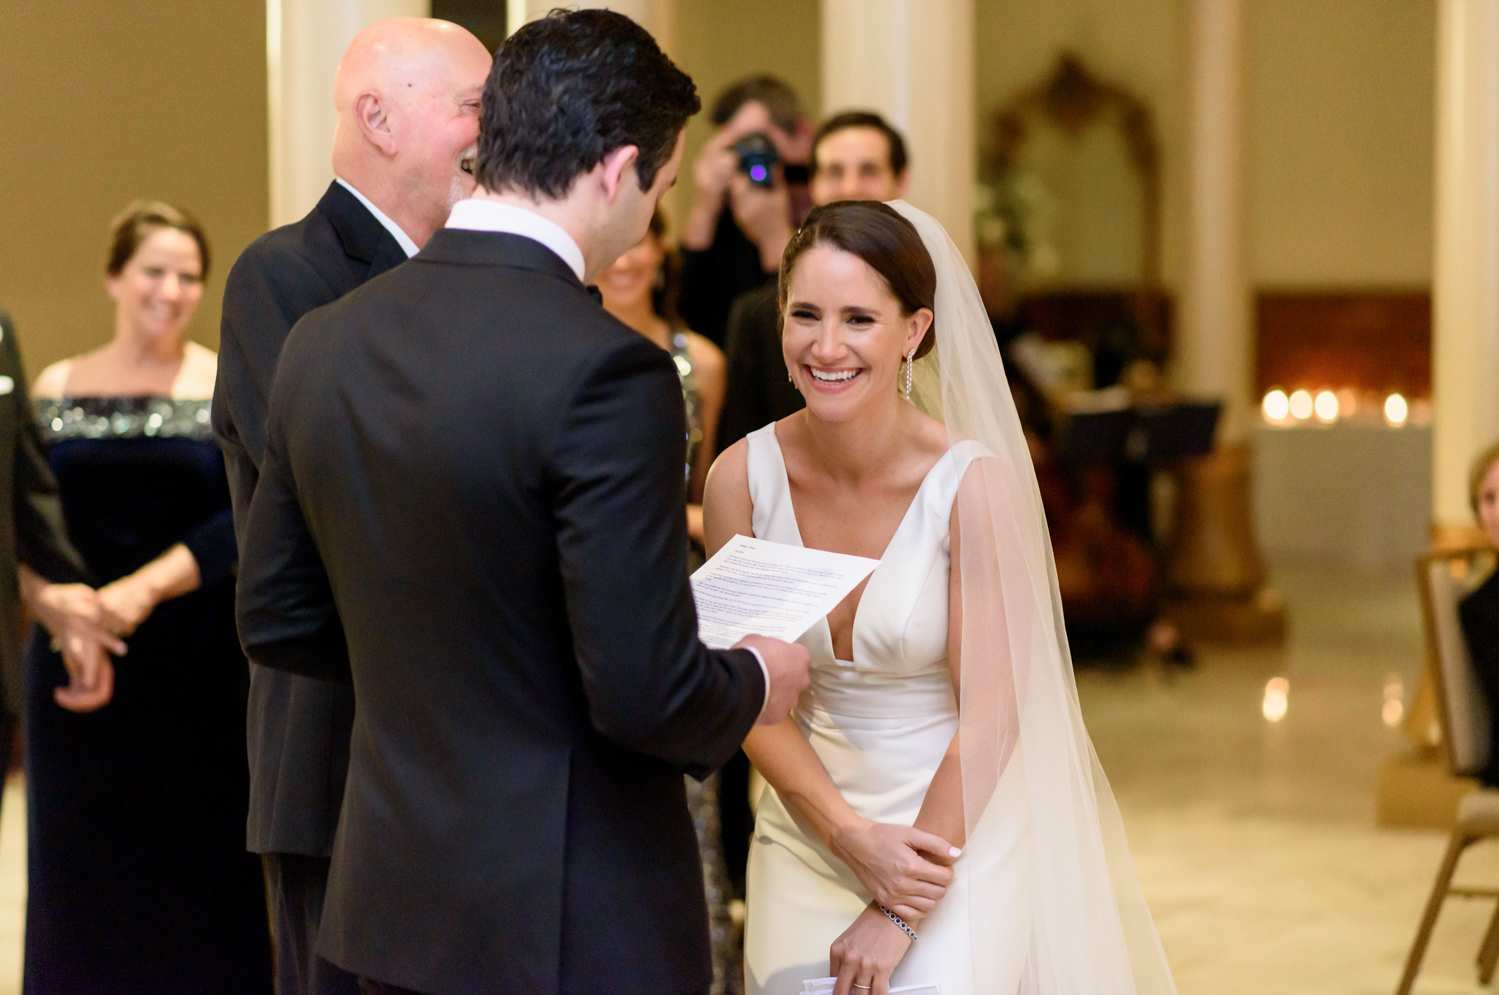 The bride laughs as the groom reads his vows